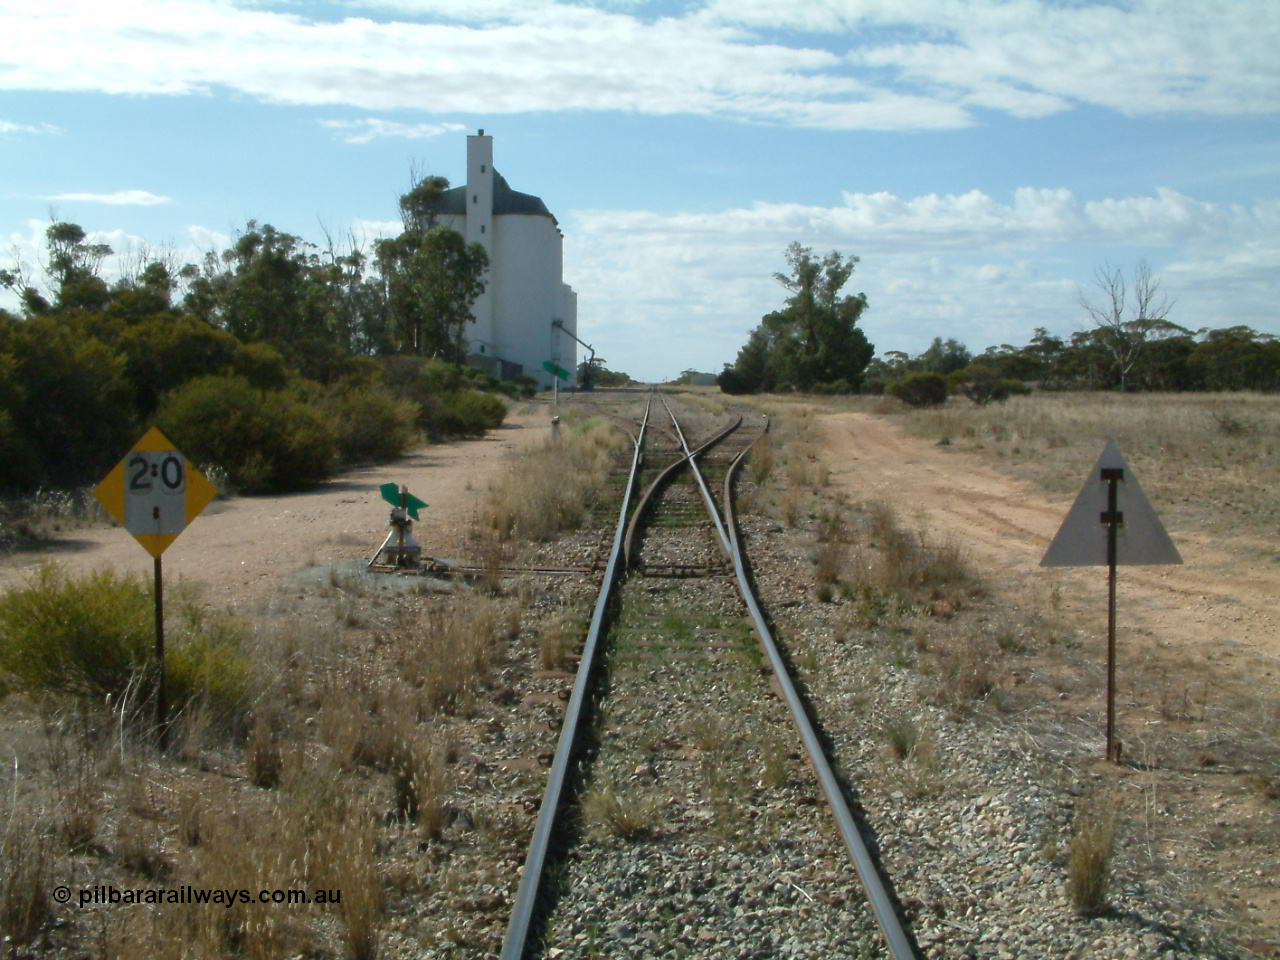 030405 150340
Warramboo, yard overview looking north with siding point levers and indicators, 20 km/h speed restriction signs, concrete SACBH silo complex on the left, 5th April 2003.
